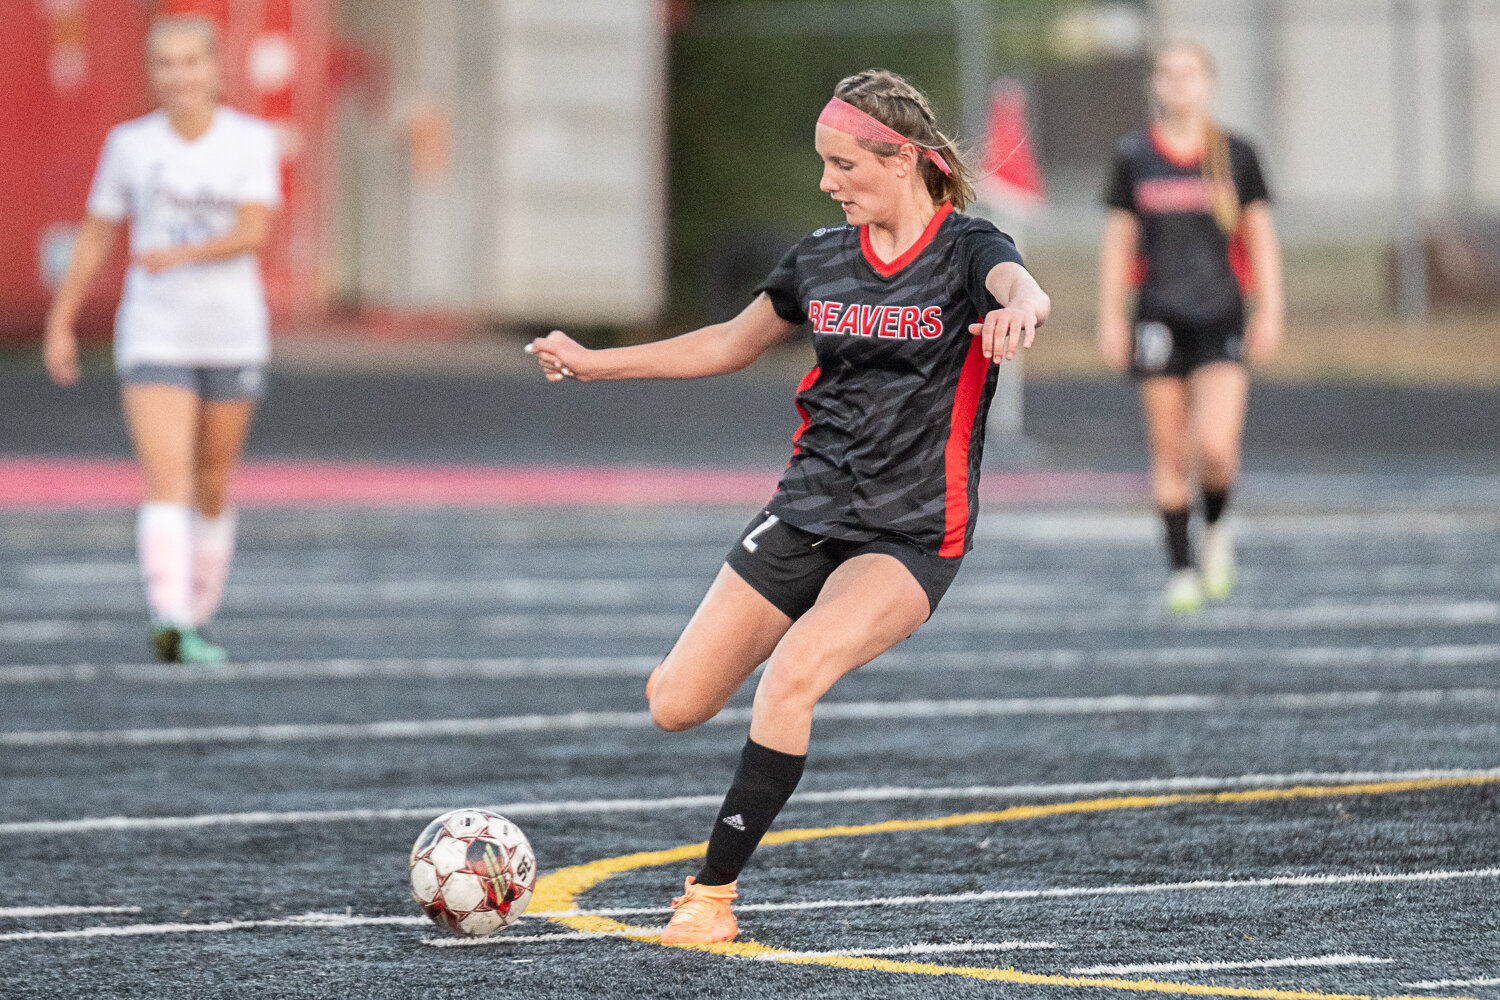 Callie Mickelson sends the ball upfield during the first half of Tenino's 0-0 draw with Adna on Sept. 14.